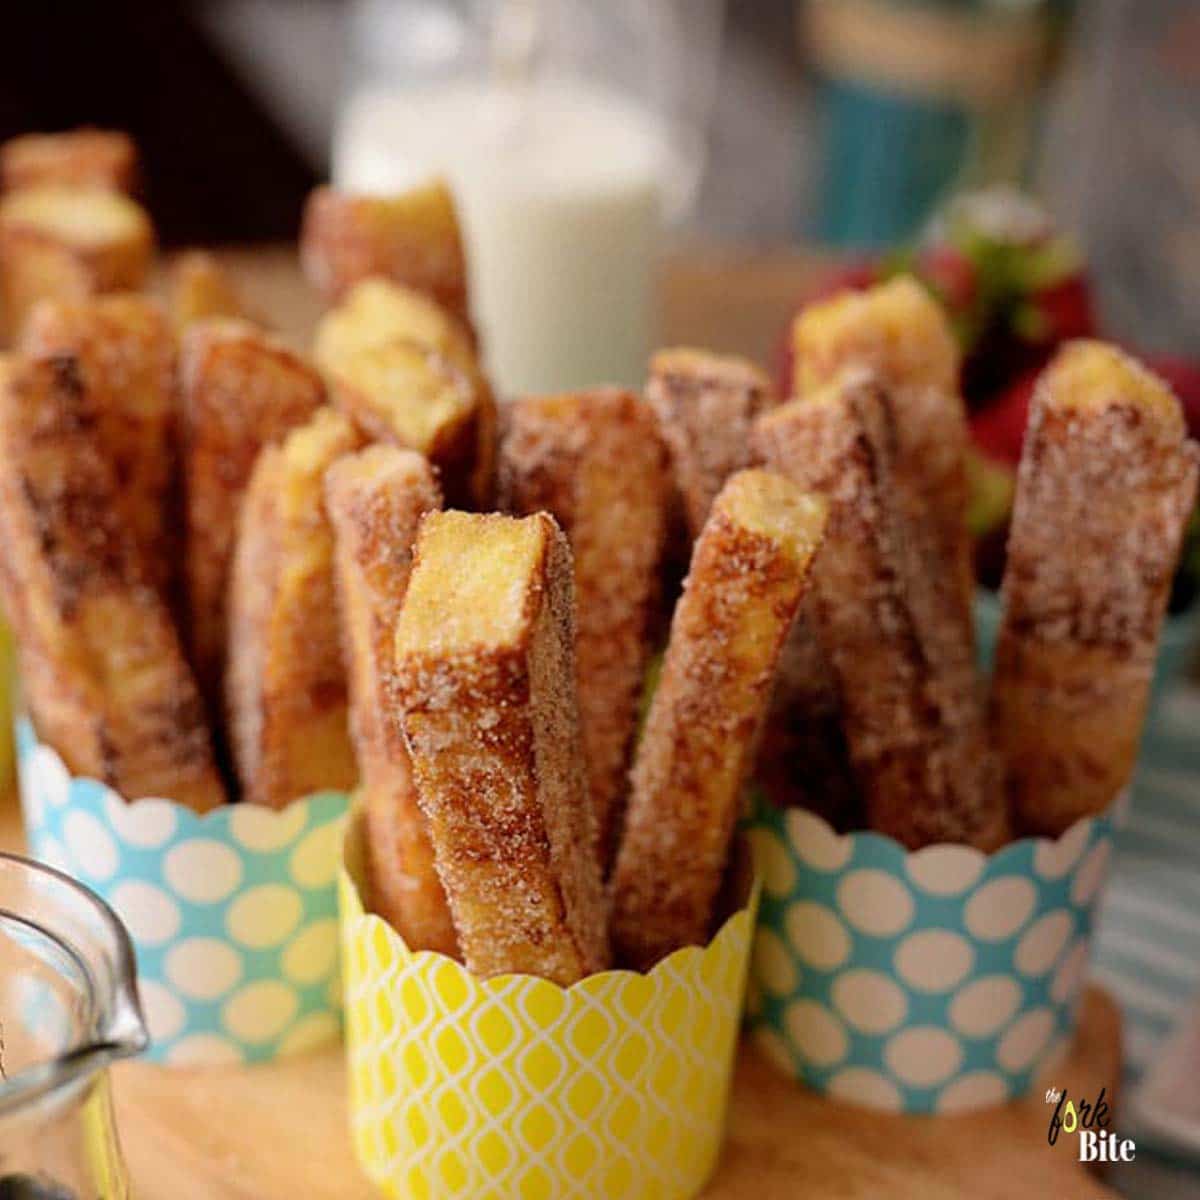 Use stale bread for your cinnamon French toast sticks to hold their shape. Breakfast you can eat with your fingers and dip in syrup.